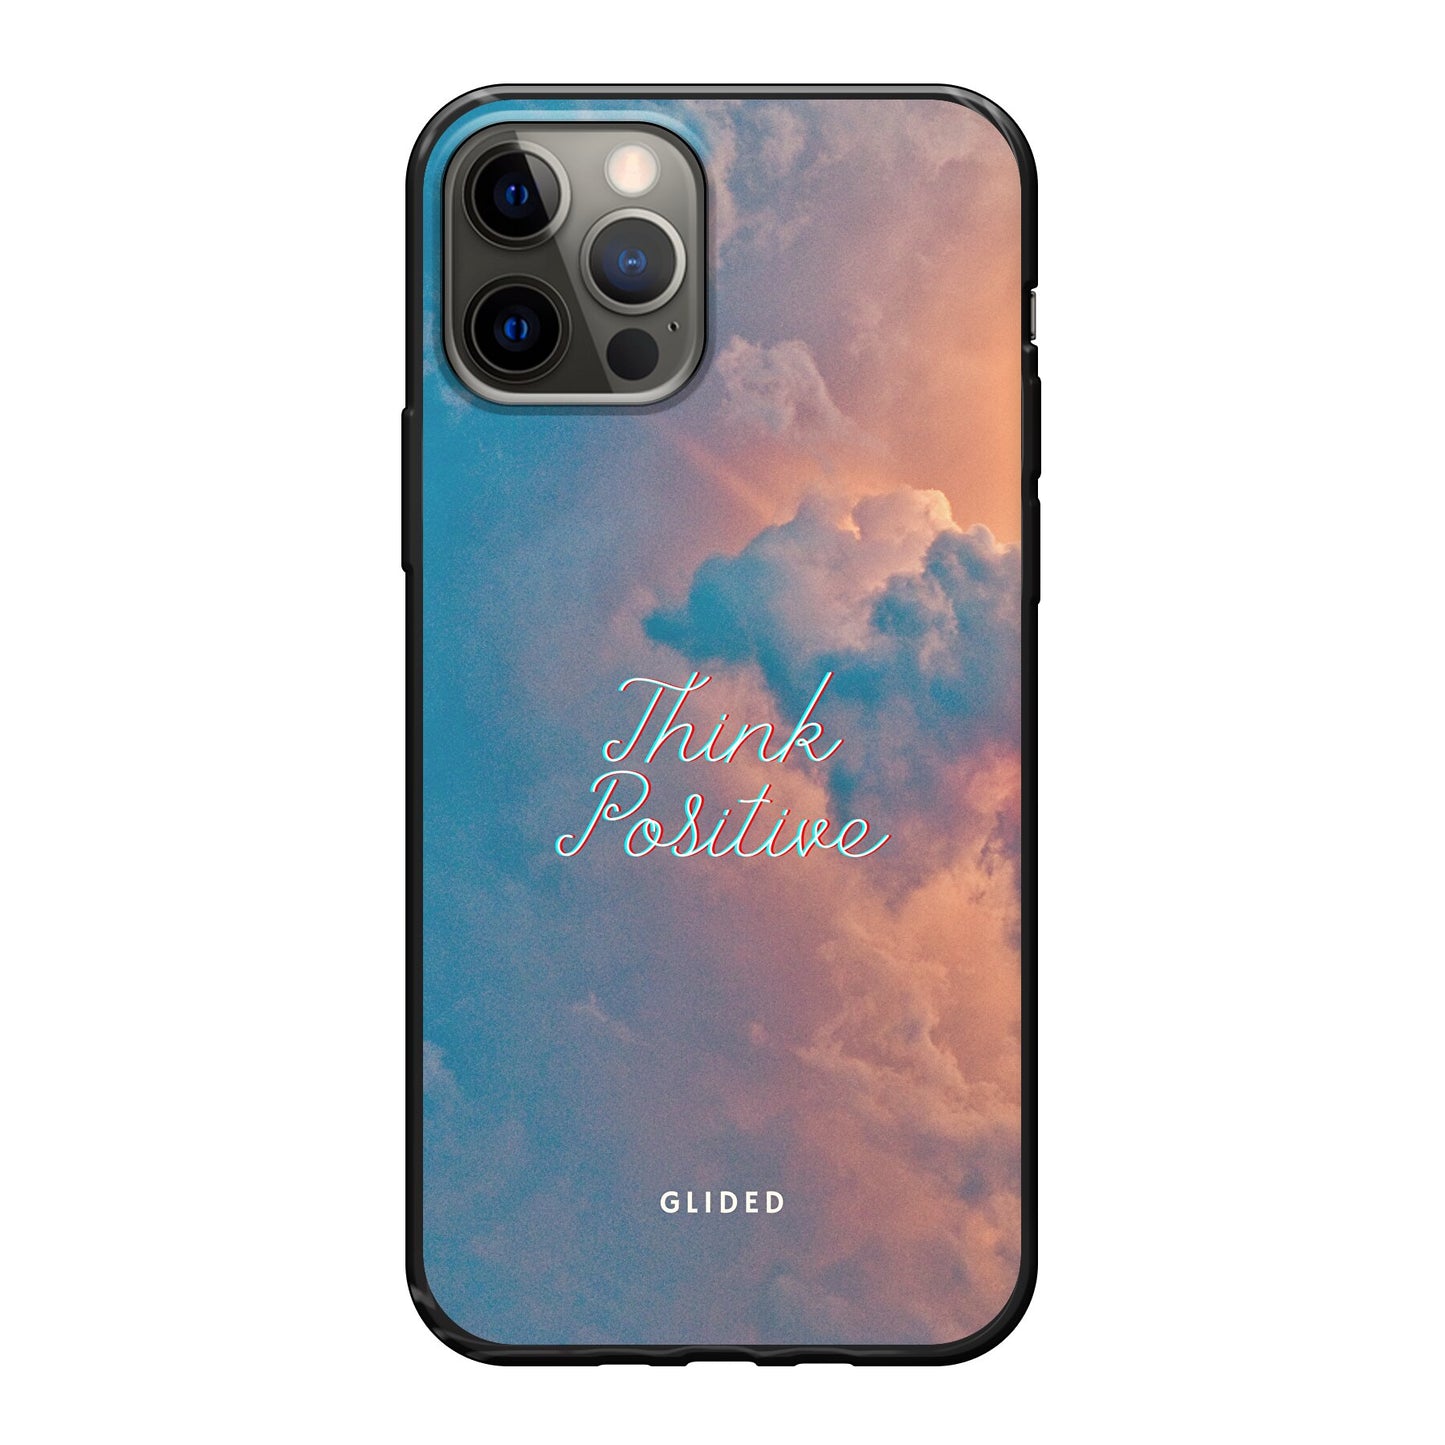 Think positive - iPhone 12 Handyhülle Soft case